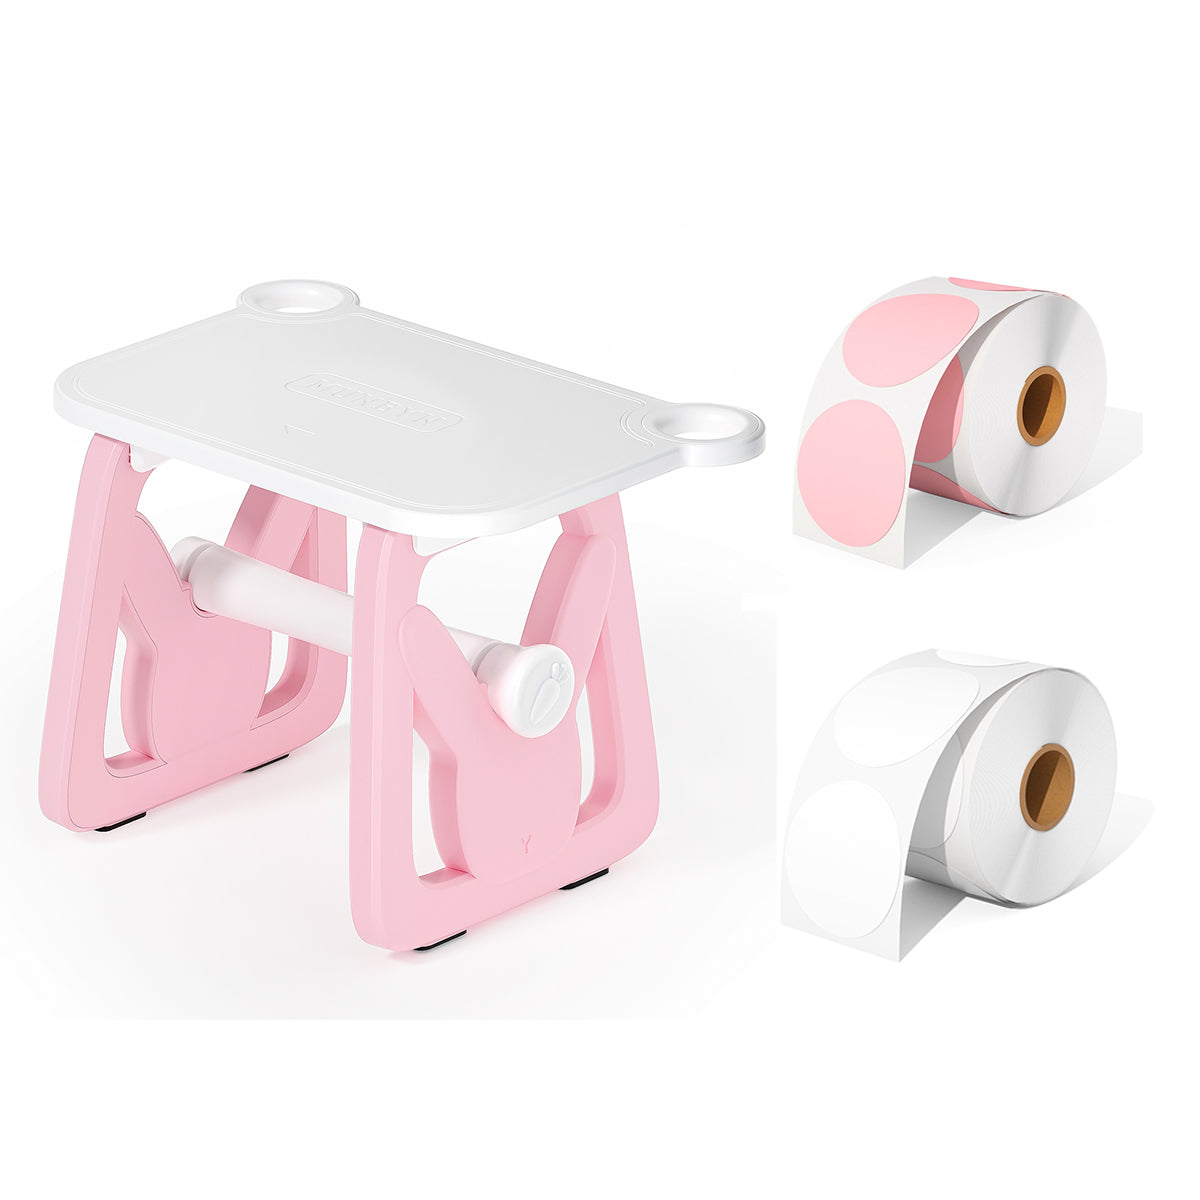 The label holder bundle includes a 3-in-1 pink label holder and two rolls of thermal labels.